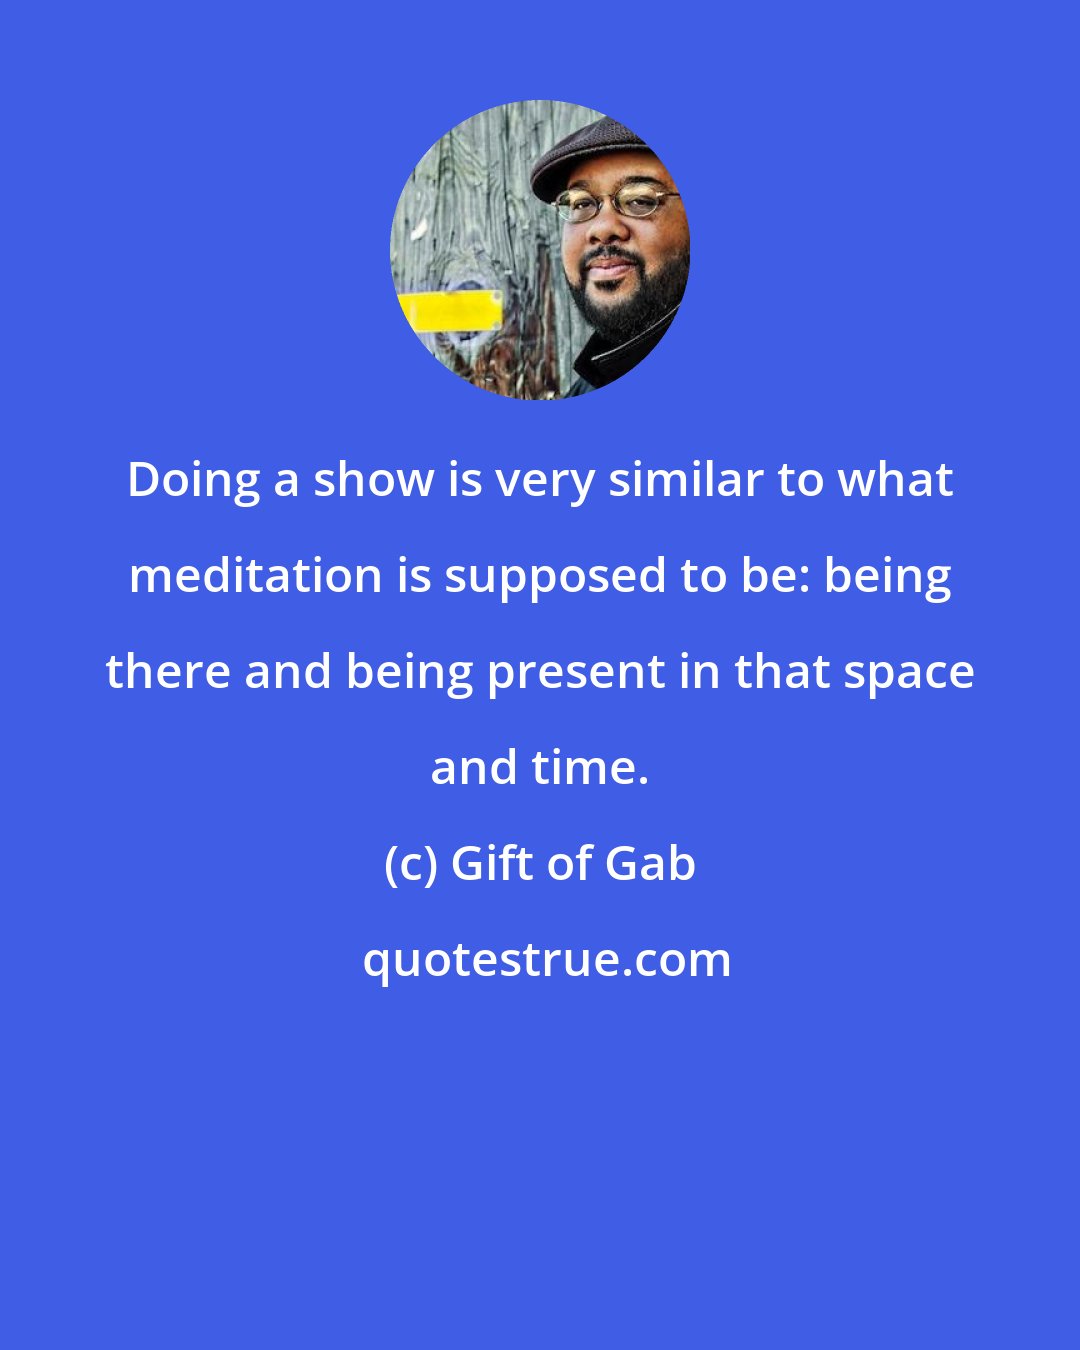 Gift of Gab: Doing a show is very similar to what meditation is supposed to be: being there and being present in that space and time.